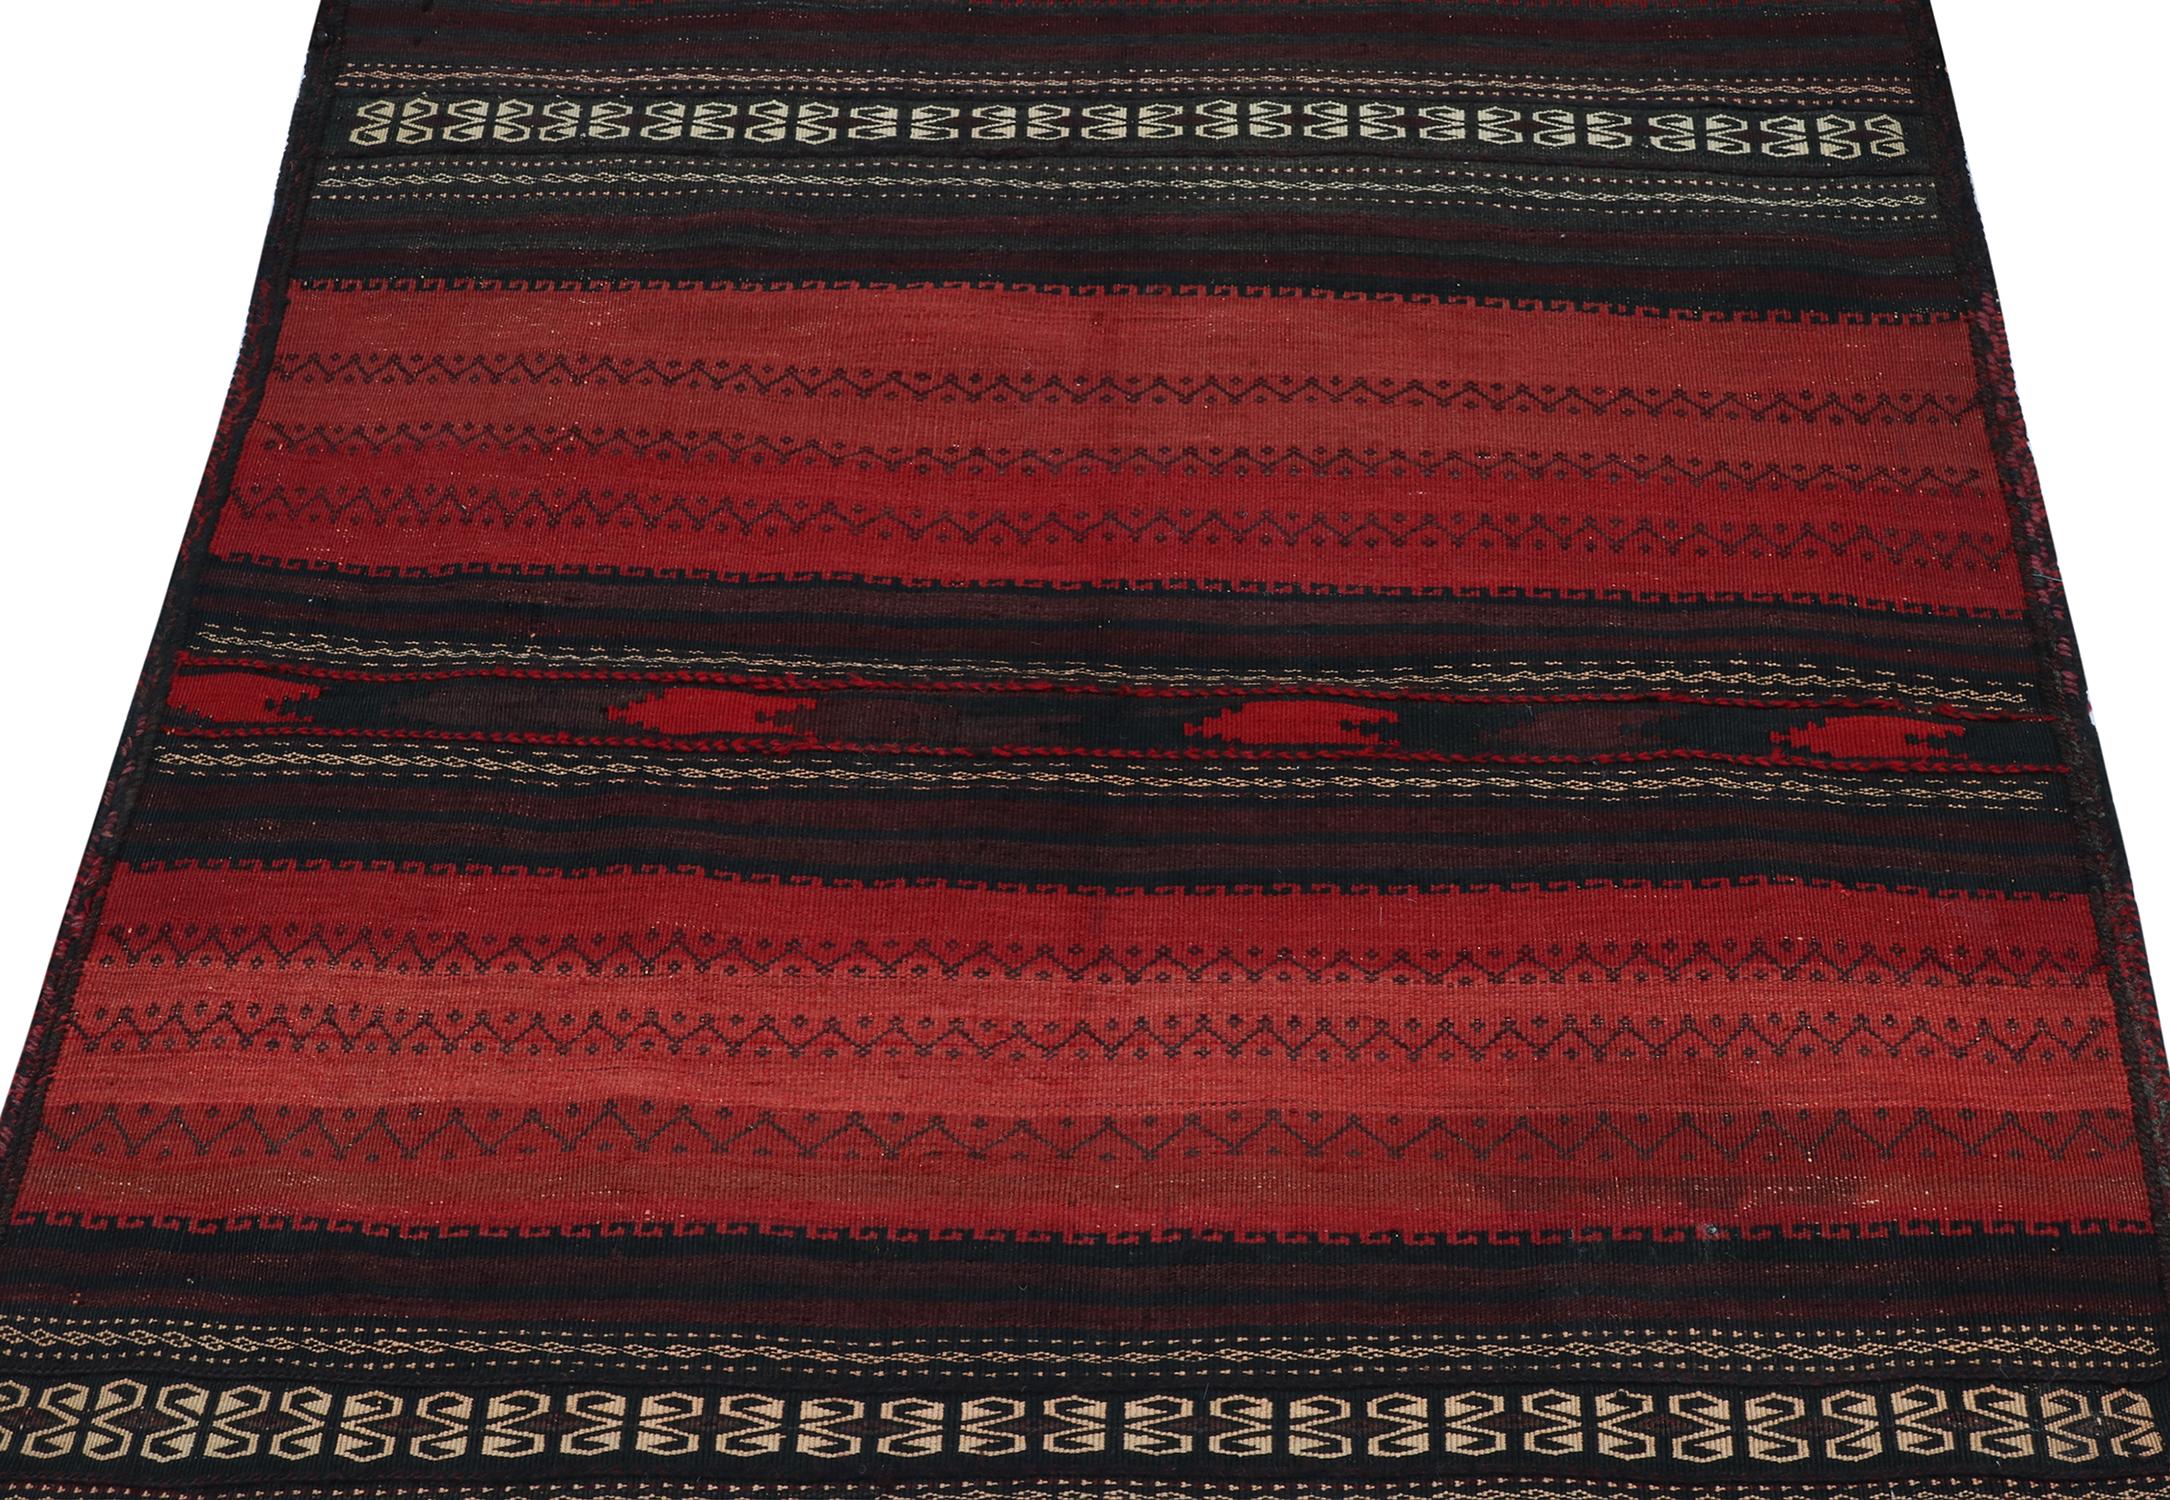 This vintage 3x3 Persian kilim is a square rug of intriguing origin—handwoven in wool circa 1960-1970.

Further on the Design:

The design may either connote a Sofreh design or a bag design that was opened into a rug. The deep color reads black and